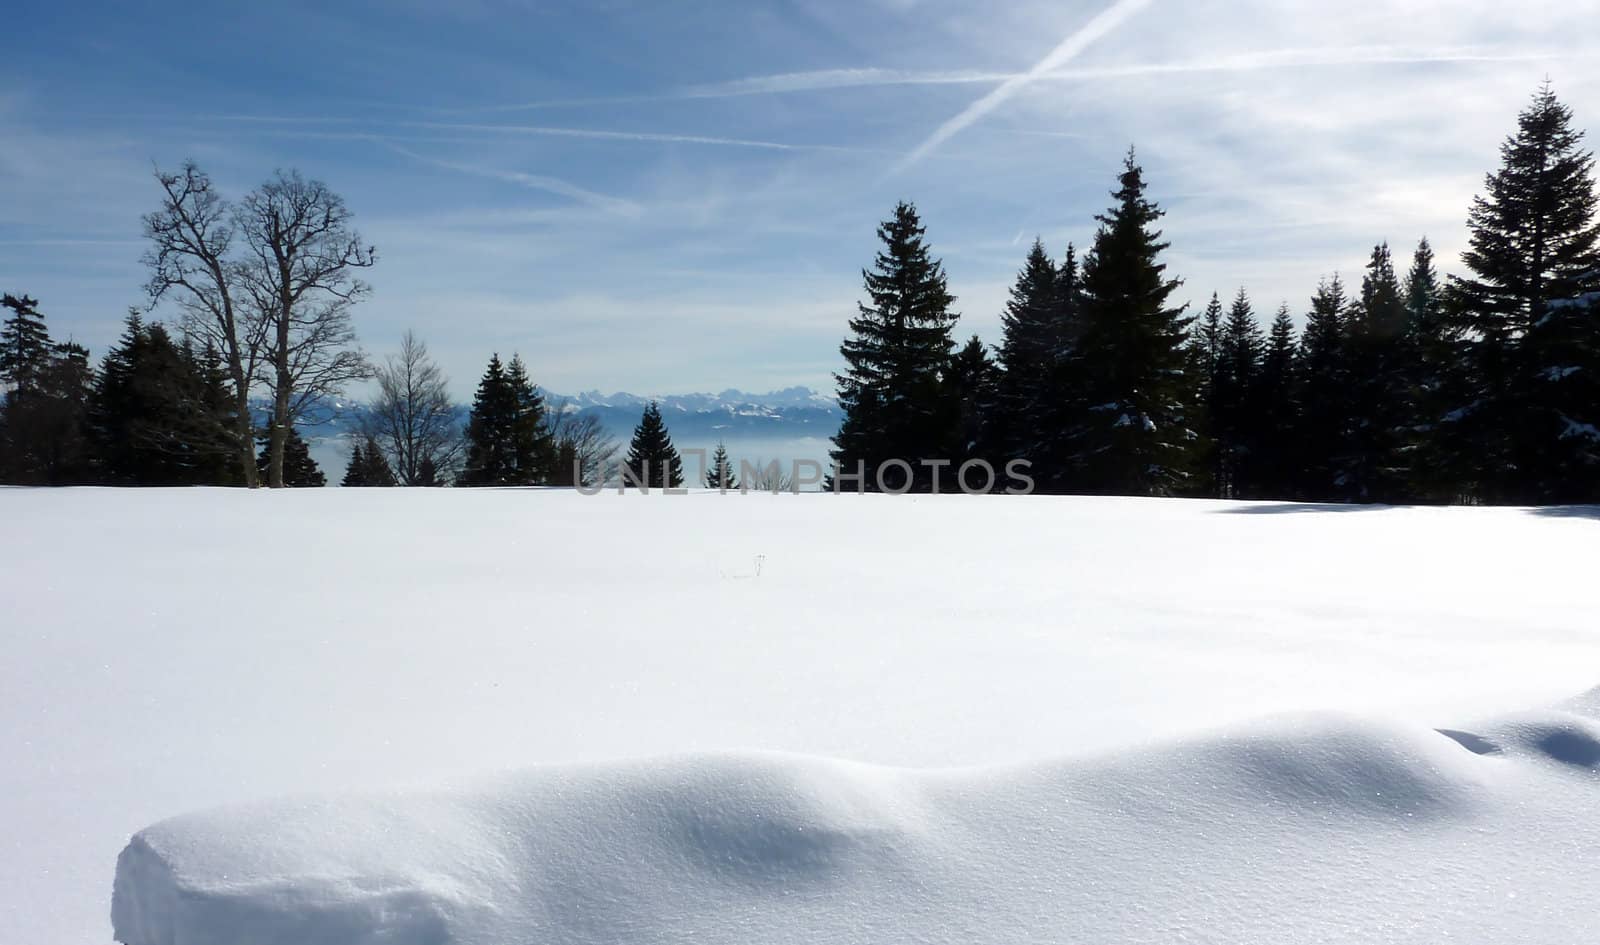 Alps behind fir trees by winter by Elenaphotos21